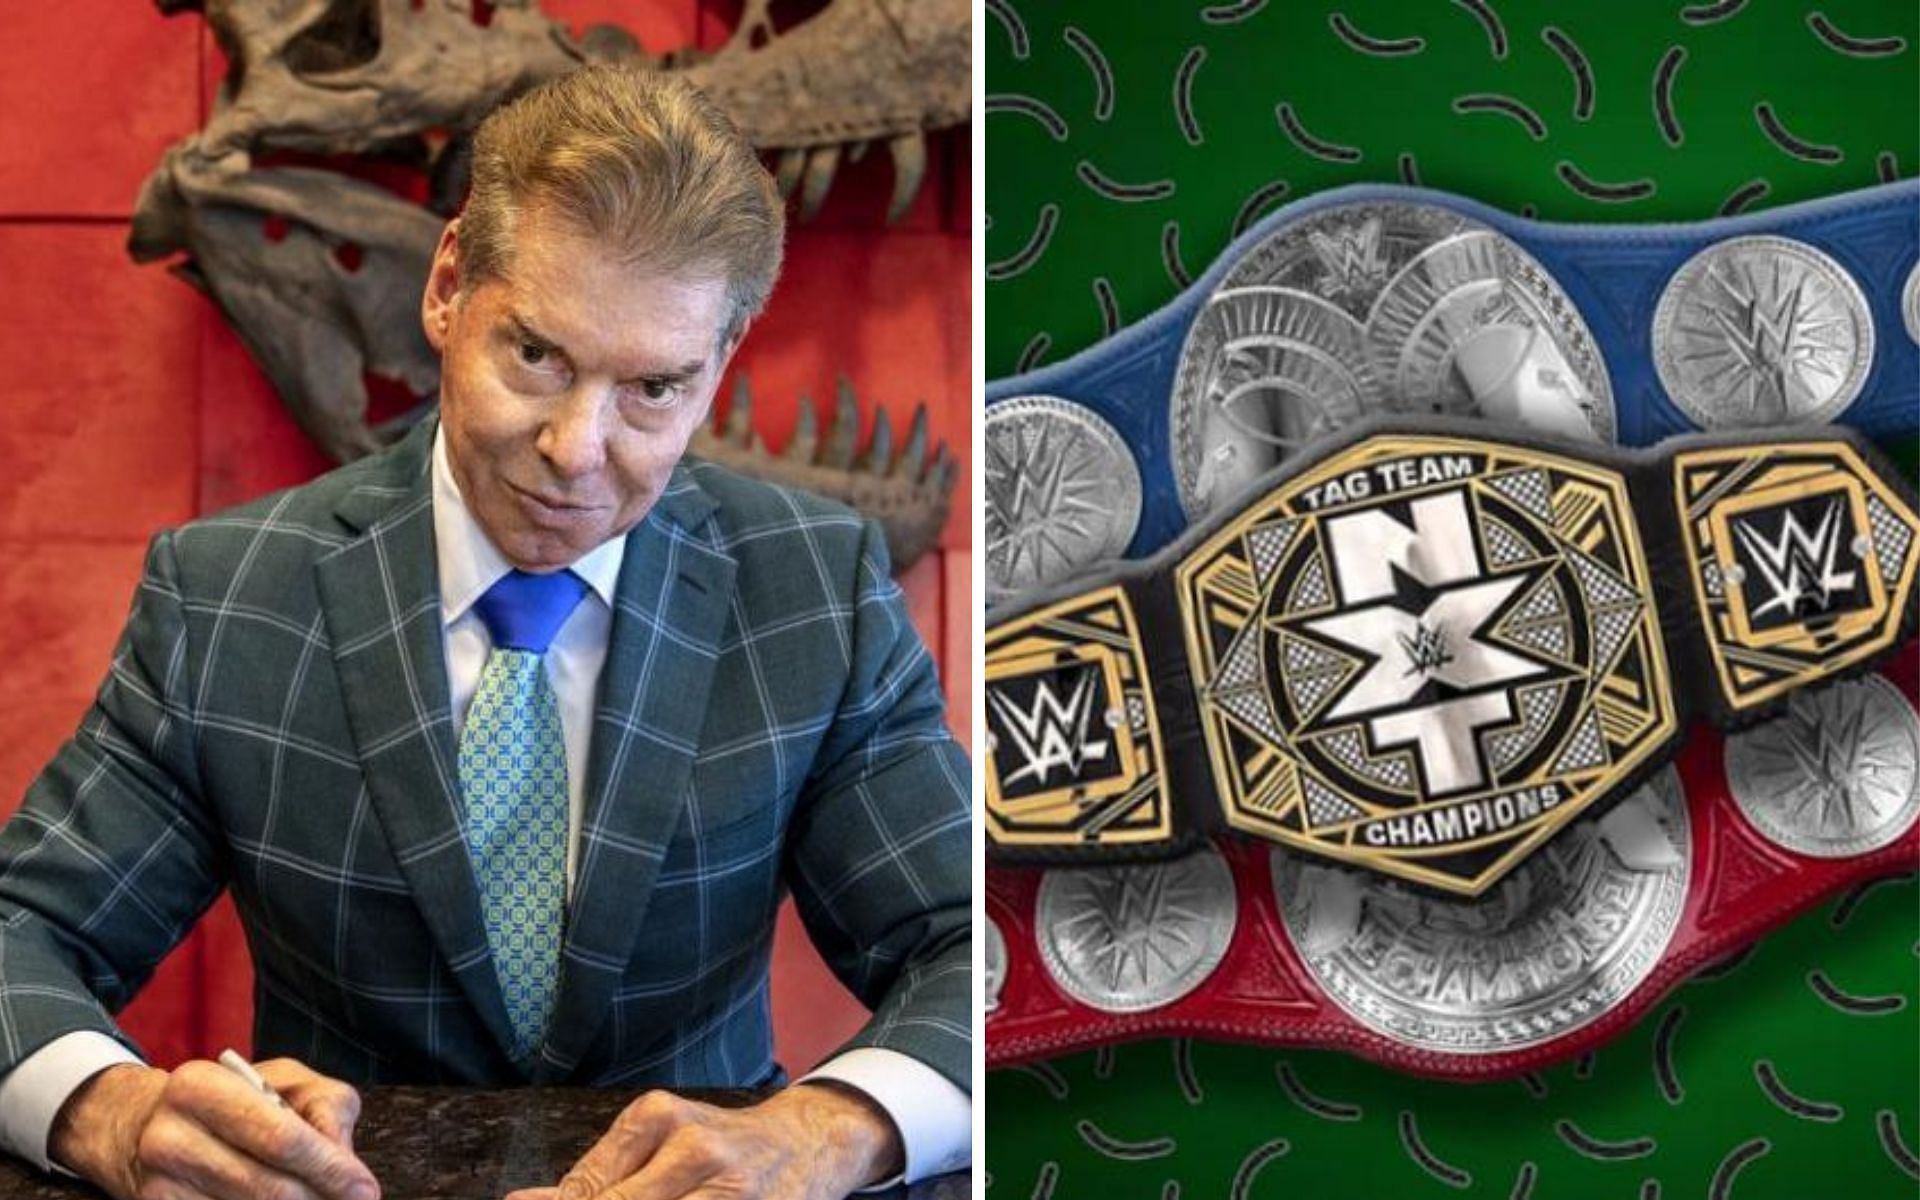 Vince McMahon is a former World Champion